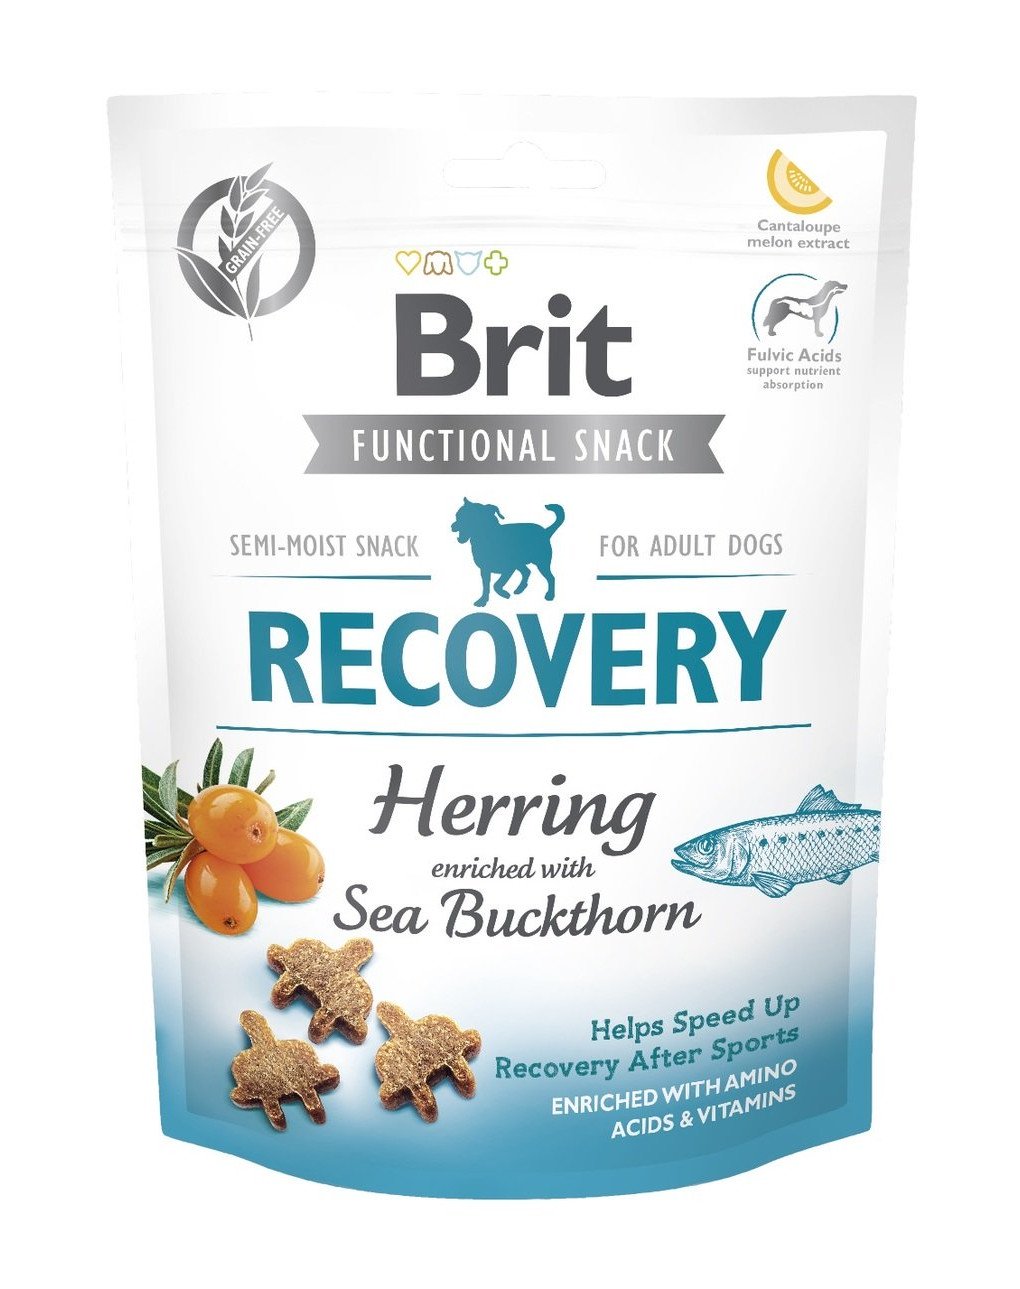 Brit – Functional Snacks Dog – Recovery-1